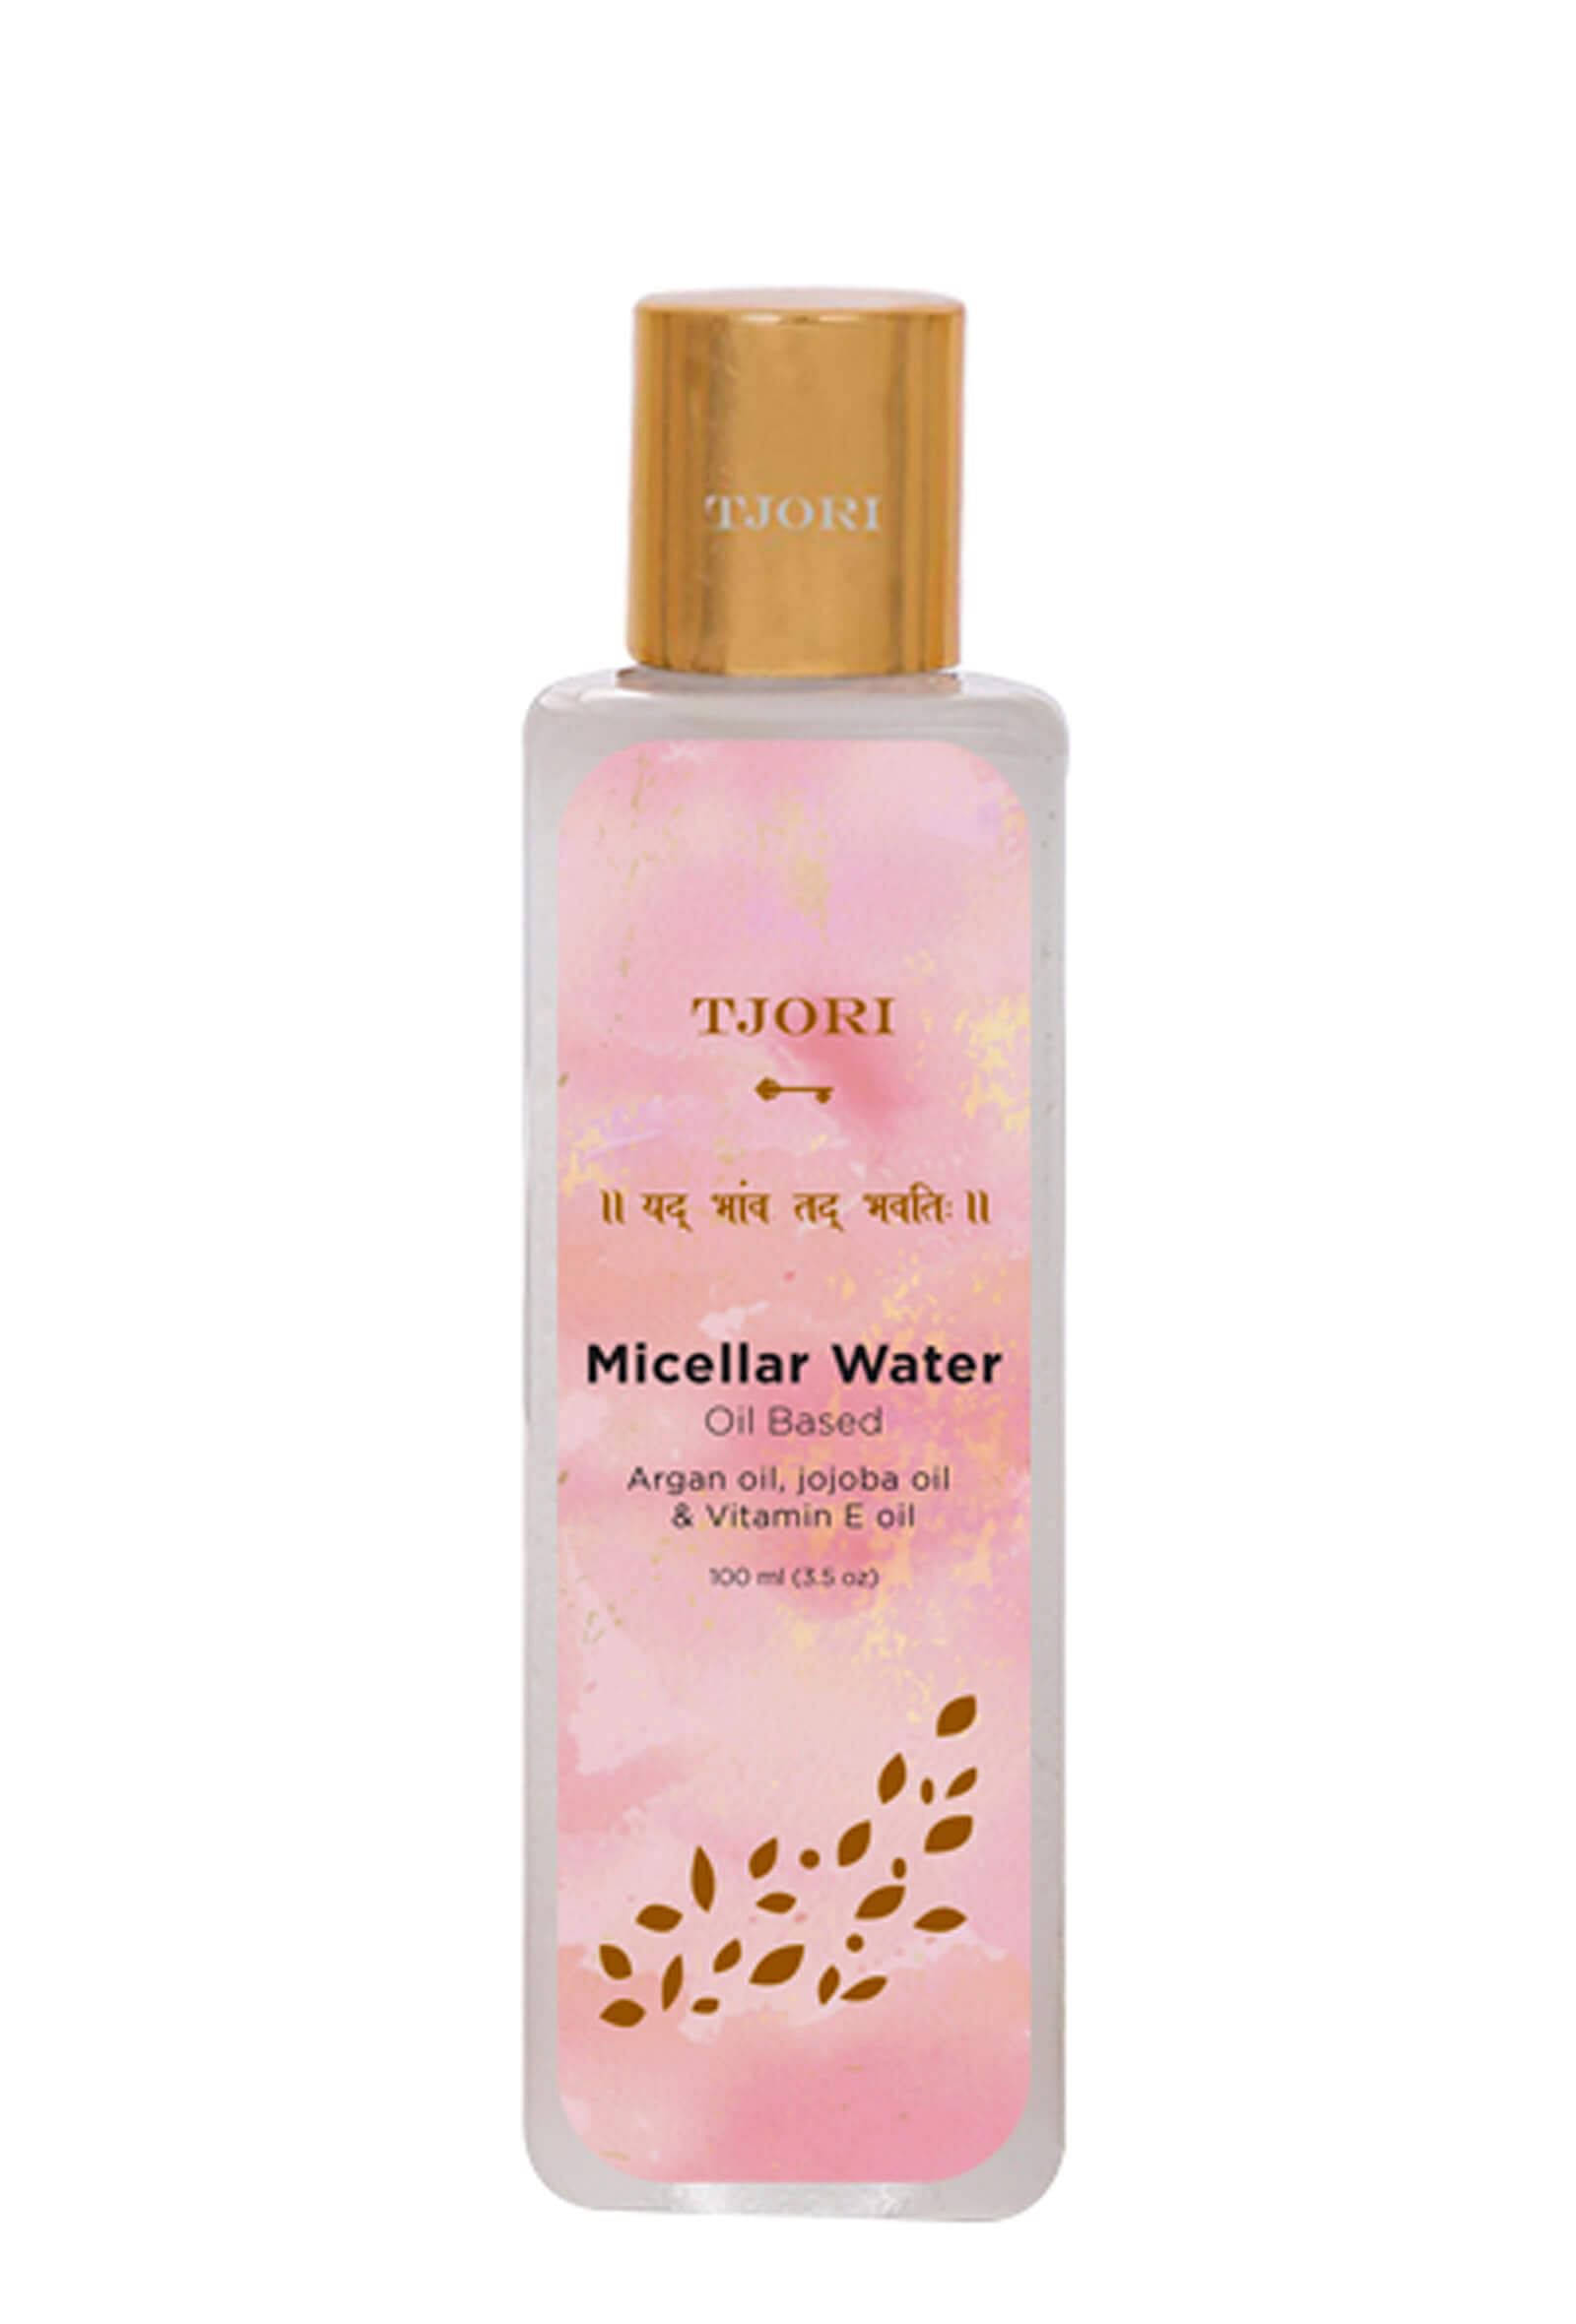 Organic Oil Free Micellar Water for Daily Cleansing - 100 ml